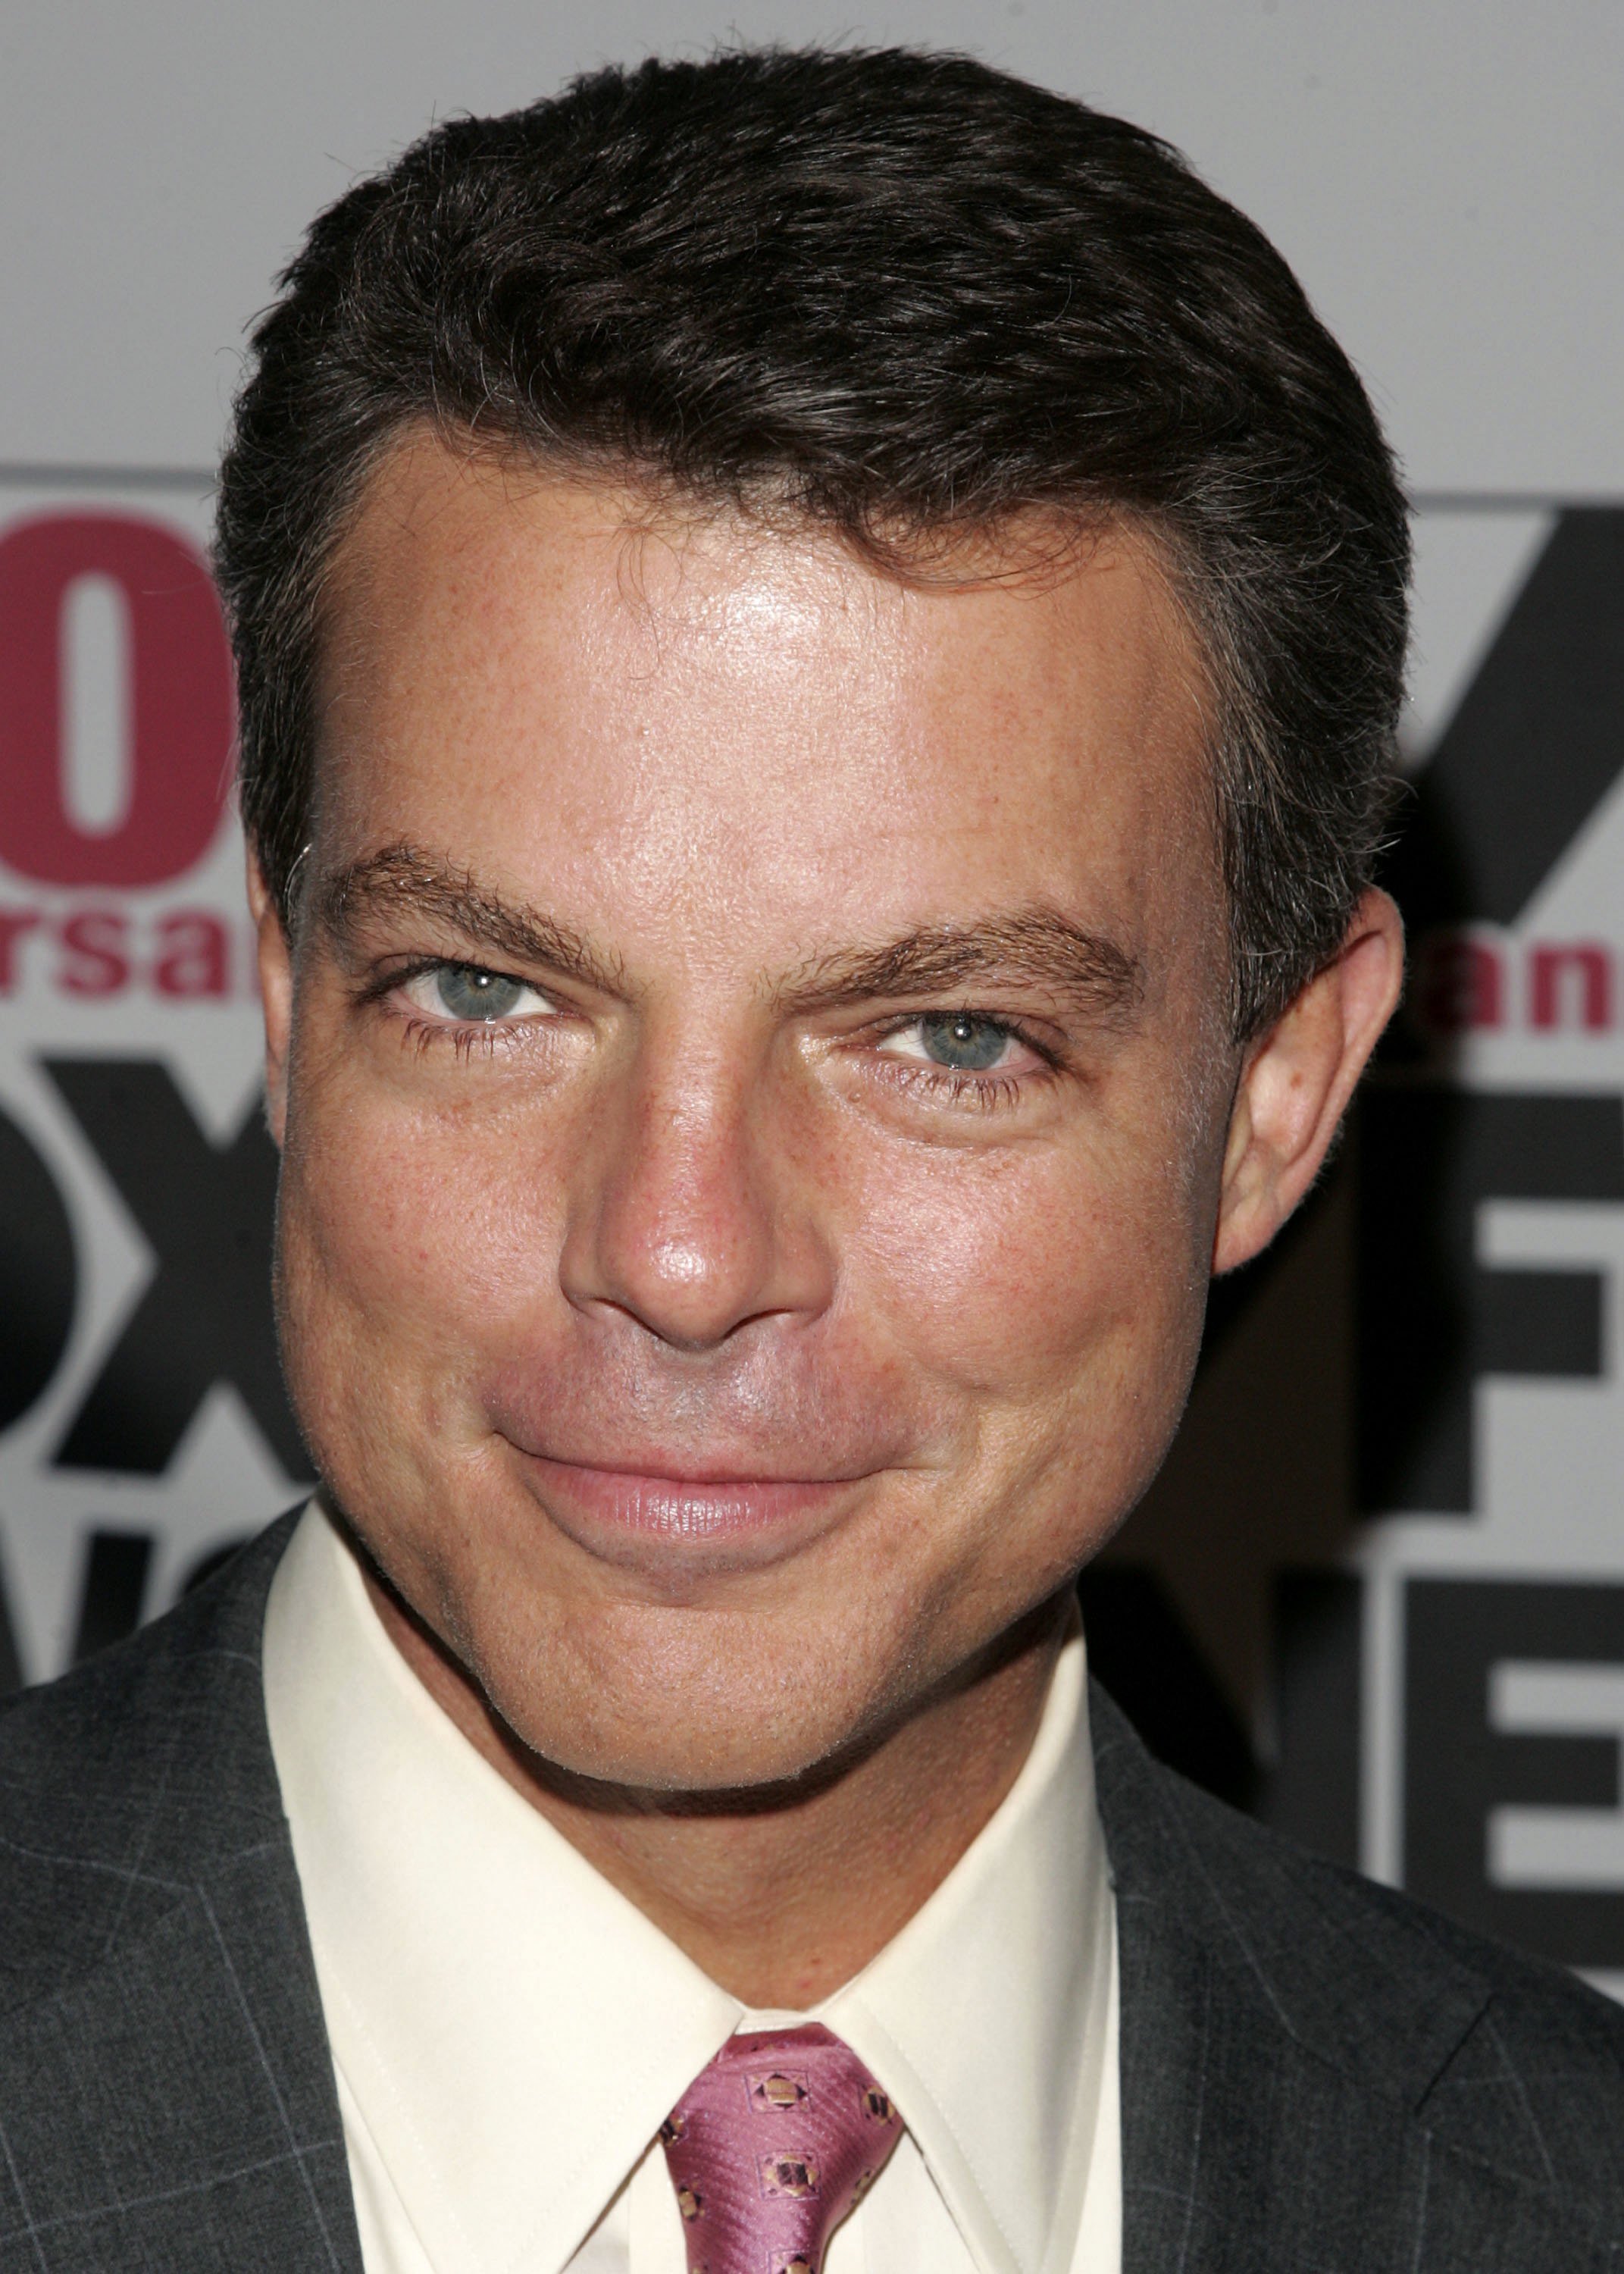 NEW YORK - OCTOBER 04: FOX News Correspondent Shepard Smith attends the Fox News Channel 10th Anniversary celebration on October 4, 2006 in New York City. (Photo by Peter Kramer/Getty Images)